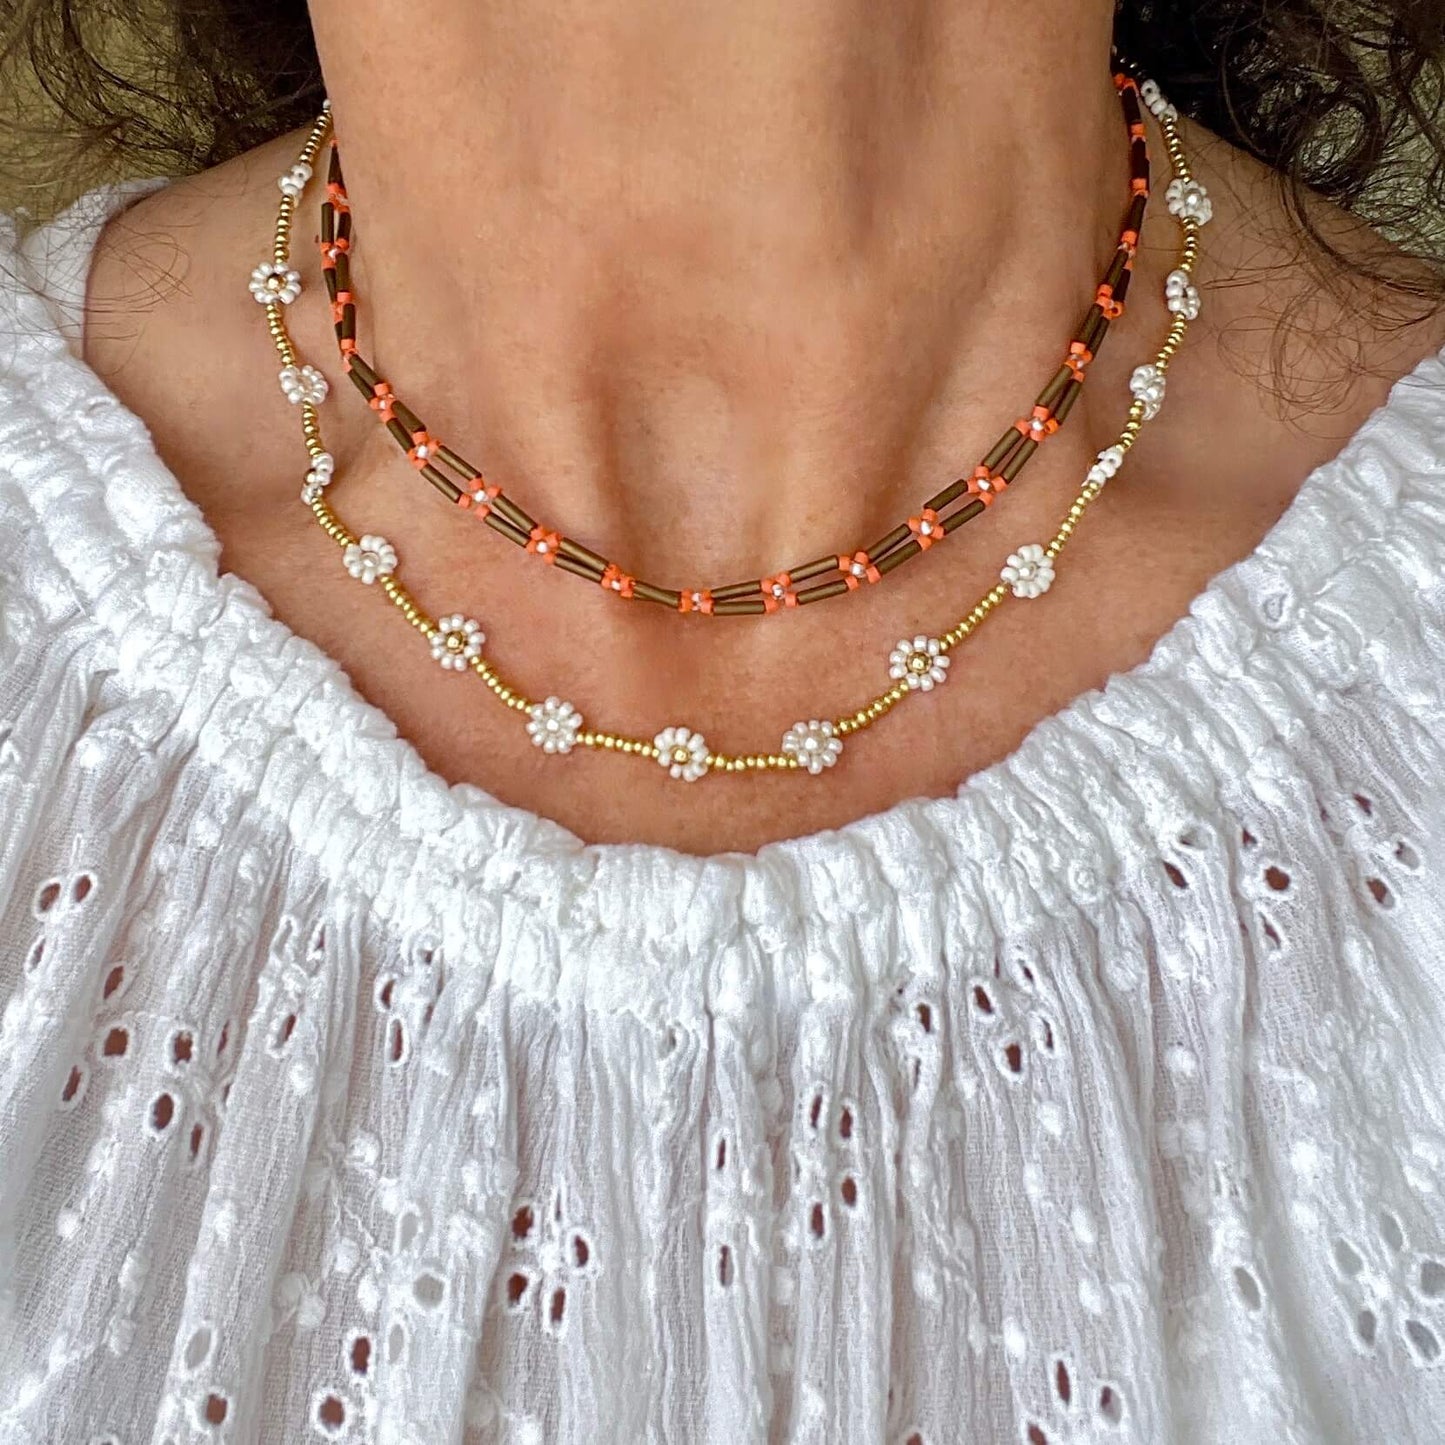 Seed bead necklaces for women with daisy chain and bugle bead style necklaces.